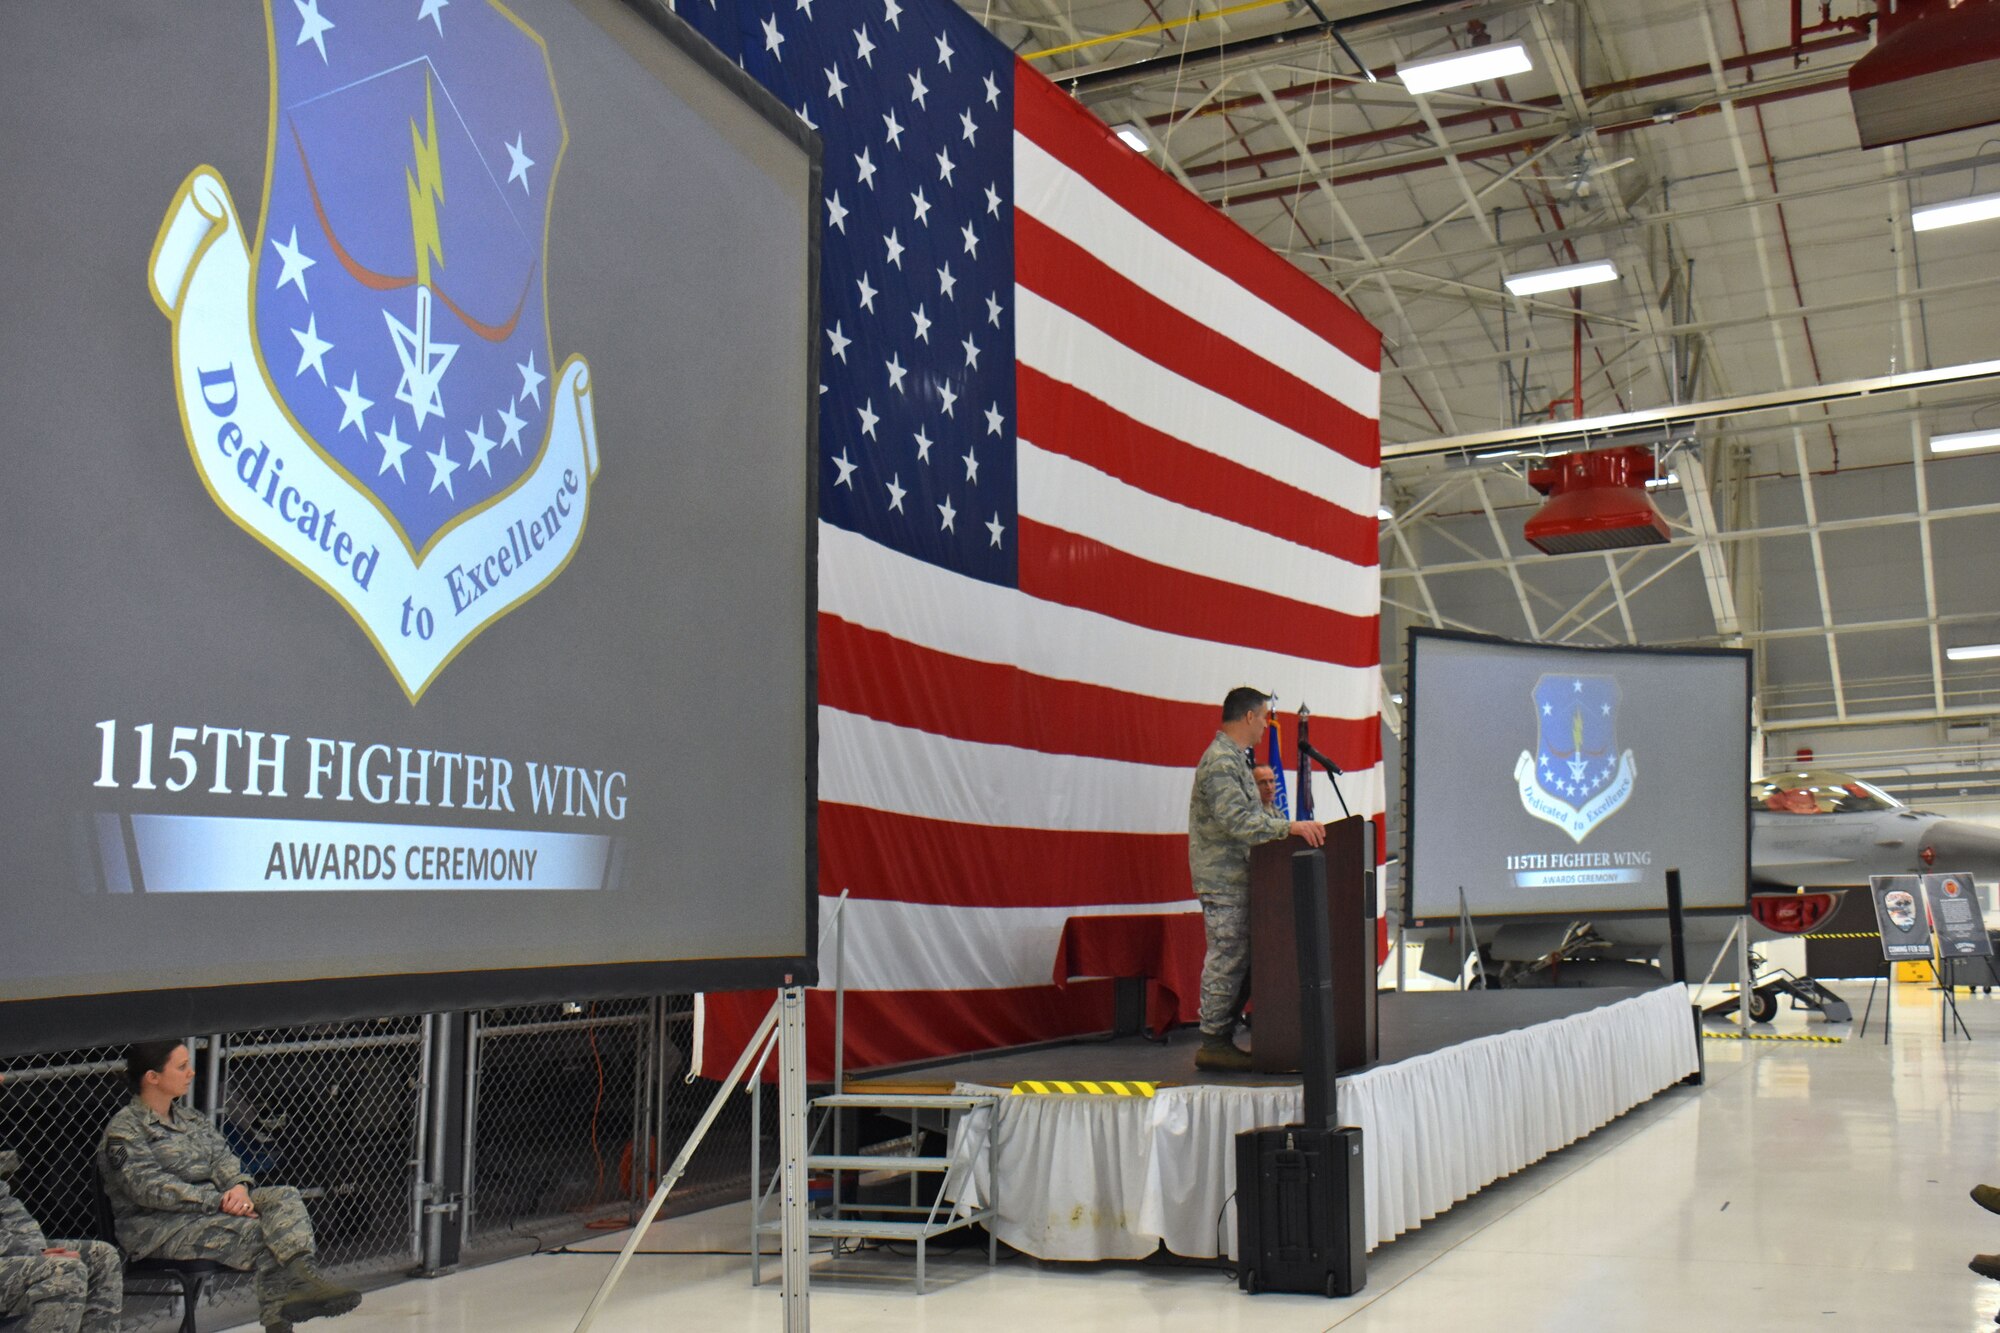 Col. Erik Peterson, commander of the Wisconsin Air National Guard's 115th Fighter Wing addresses unit members during the annual awards ceremony at Truax Field in Madison, Wisconsin, Jan. 6, 2017. The ceremony highlighted Airman from throughout the unit who displayed exemplary skill and leadership in the performance of their duties both at home, and in deployed locations around the world. (U.S. Air National Guard photo by Master Sgt. Paul Gorman)